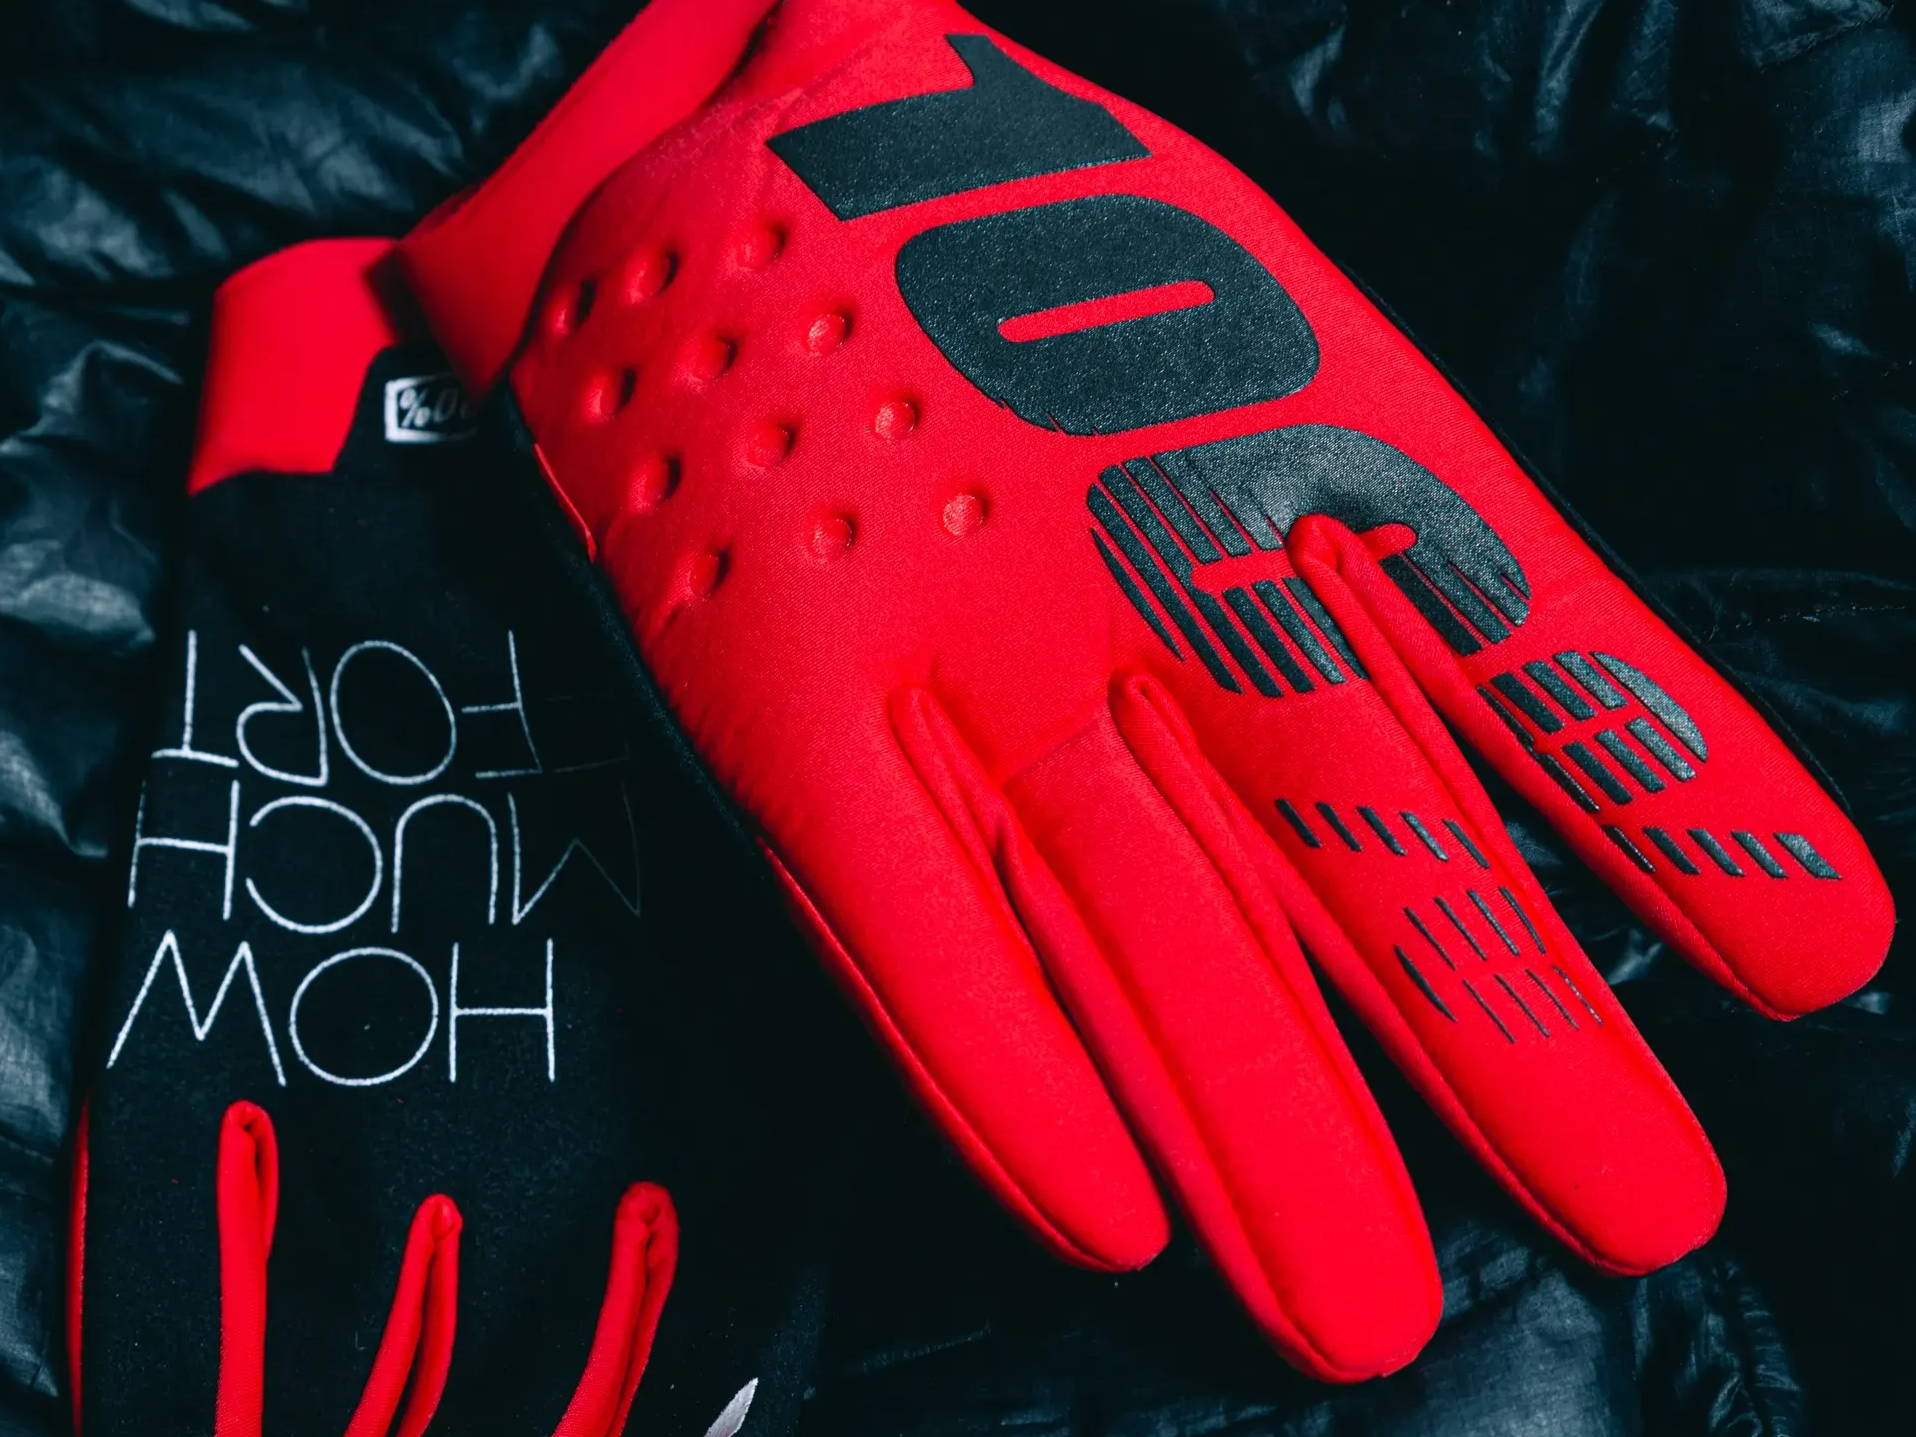 red 100% brisker mtb gloves on a black jacket showing detail of top of glove and the palm of the glove